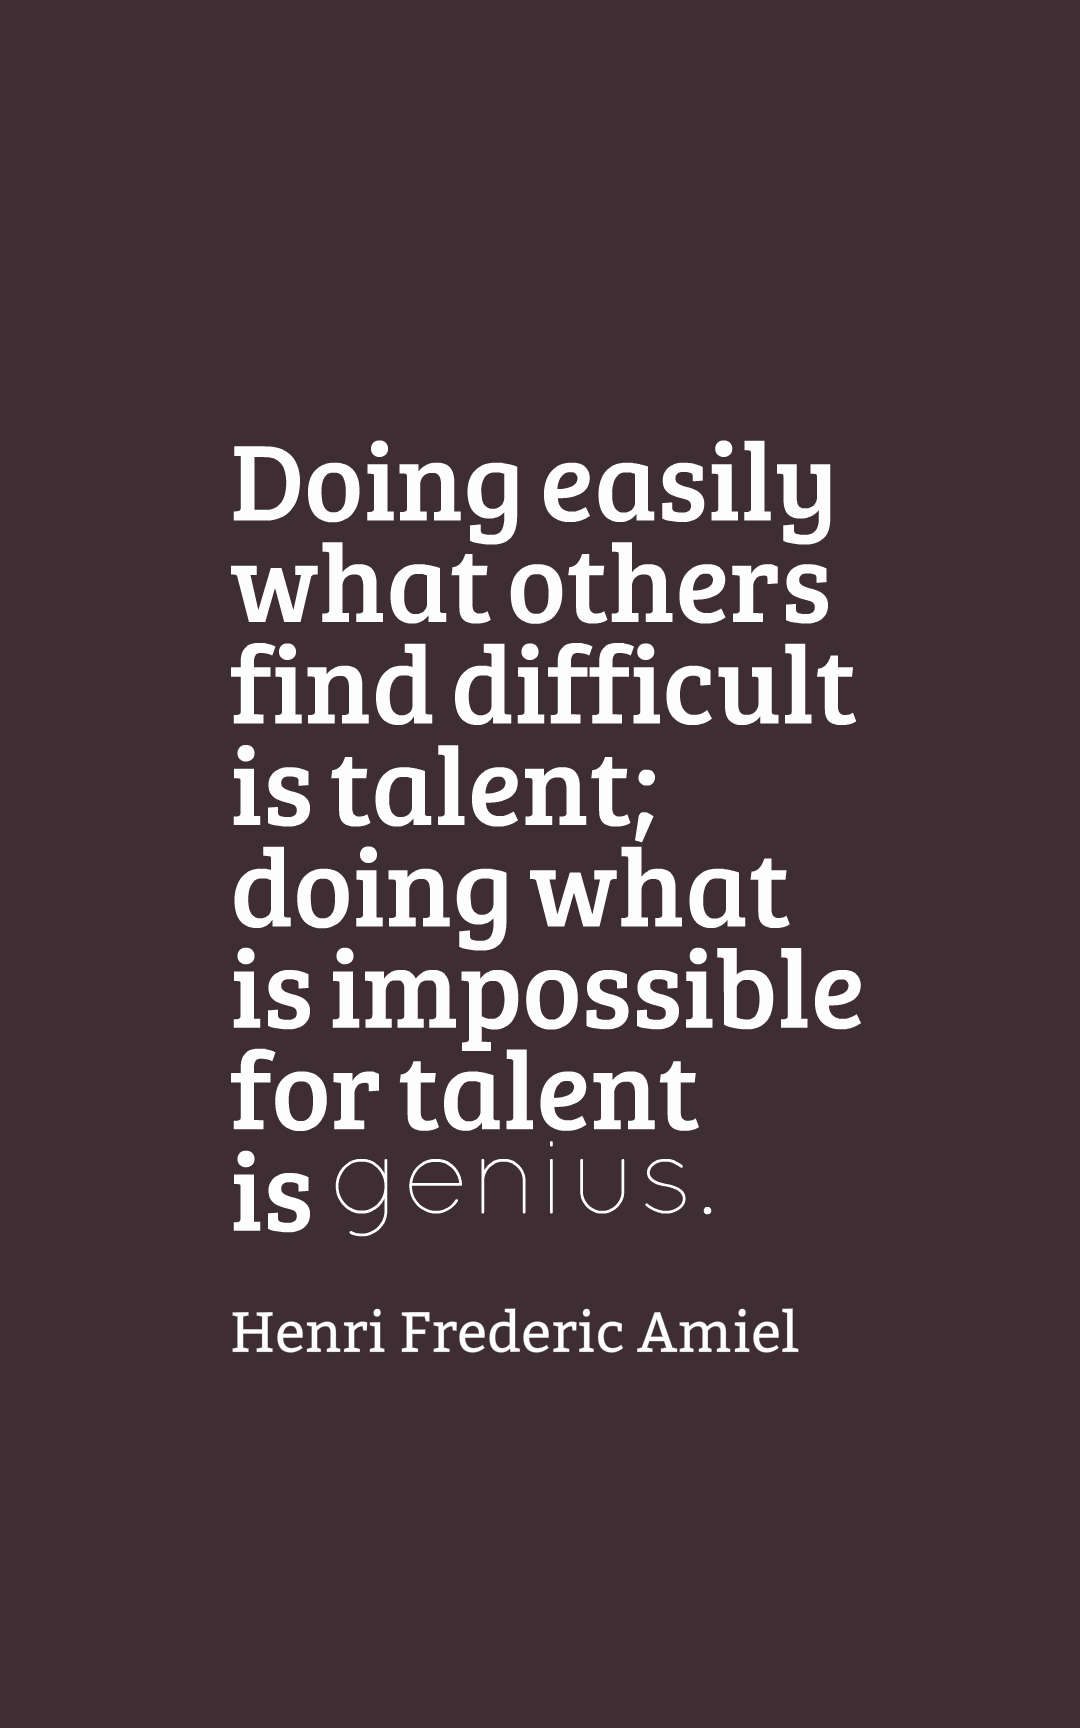 Doing easily what others find difficult is talent; doing what is impossible for talent is genius.